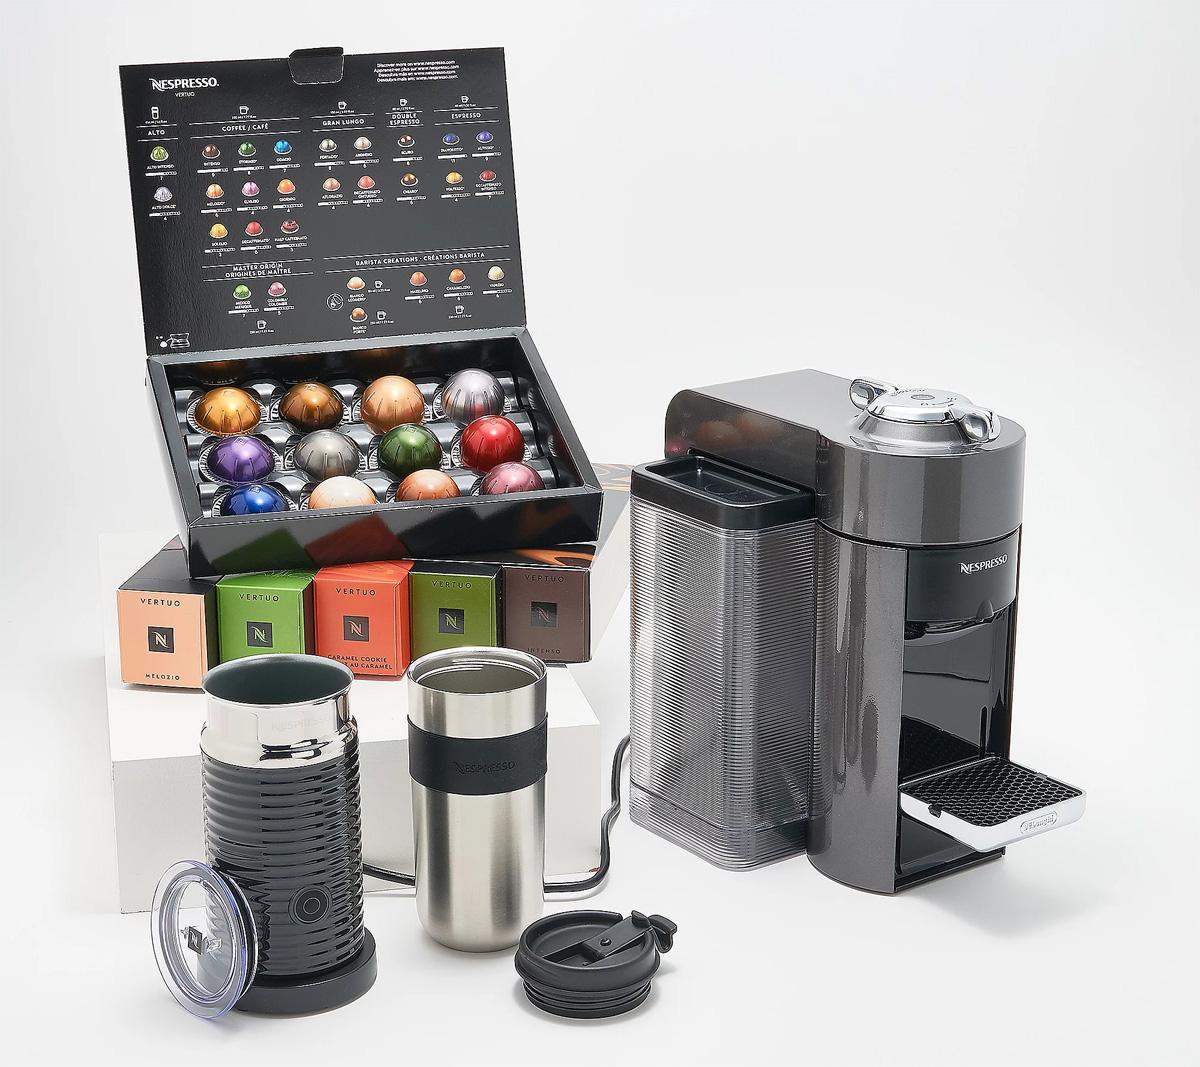 Nespresso Vertuo Espresso and Coffee Maker with Milk Frother for $144.98 Shipped